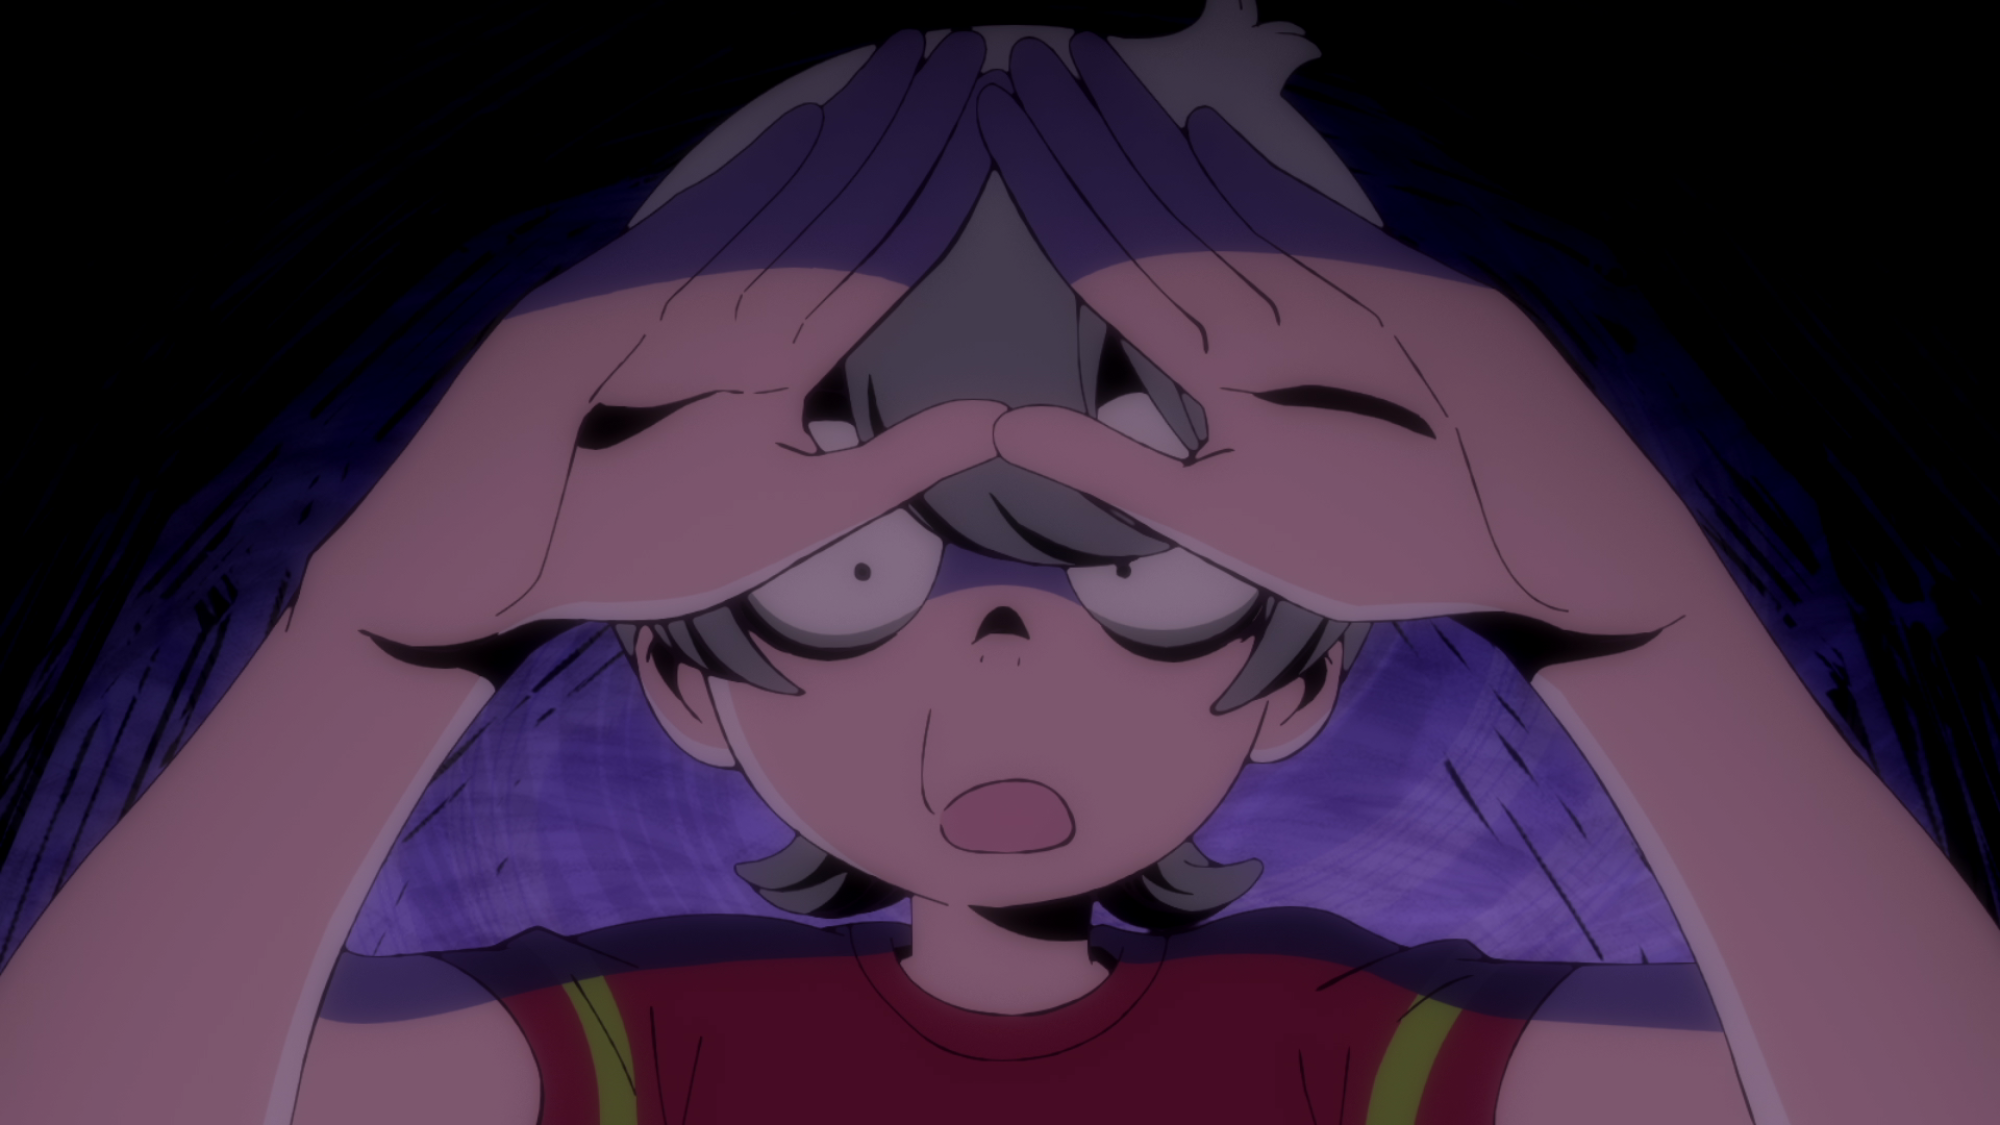 A animated still of a boy with his hands shaped in a triangle near his forehead.